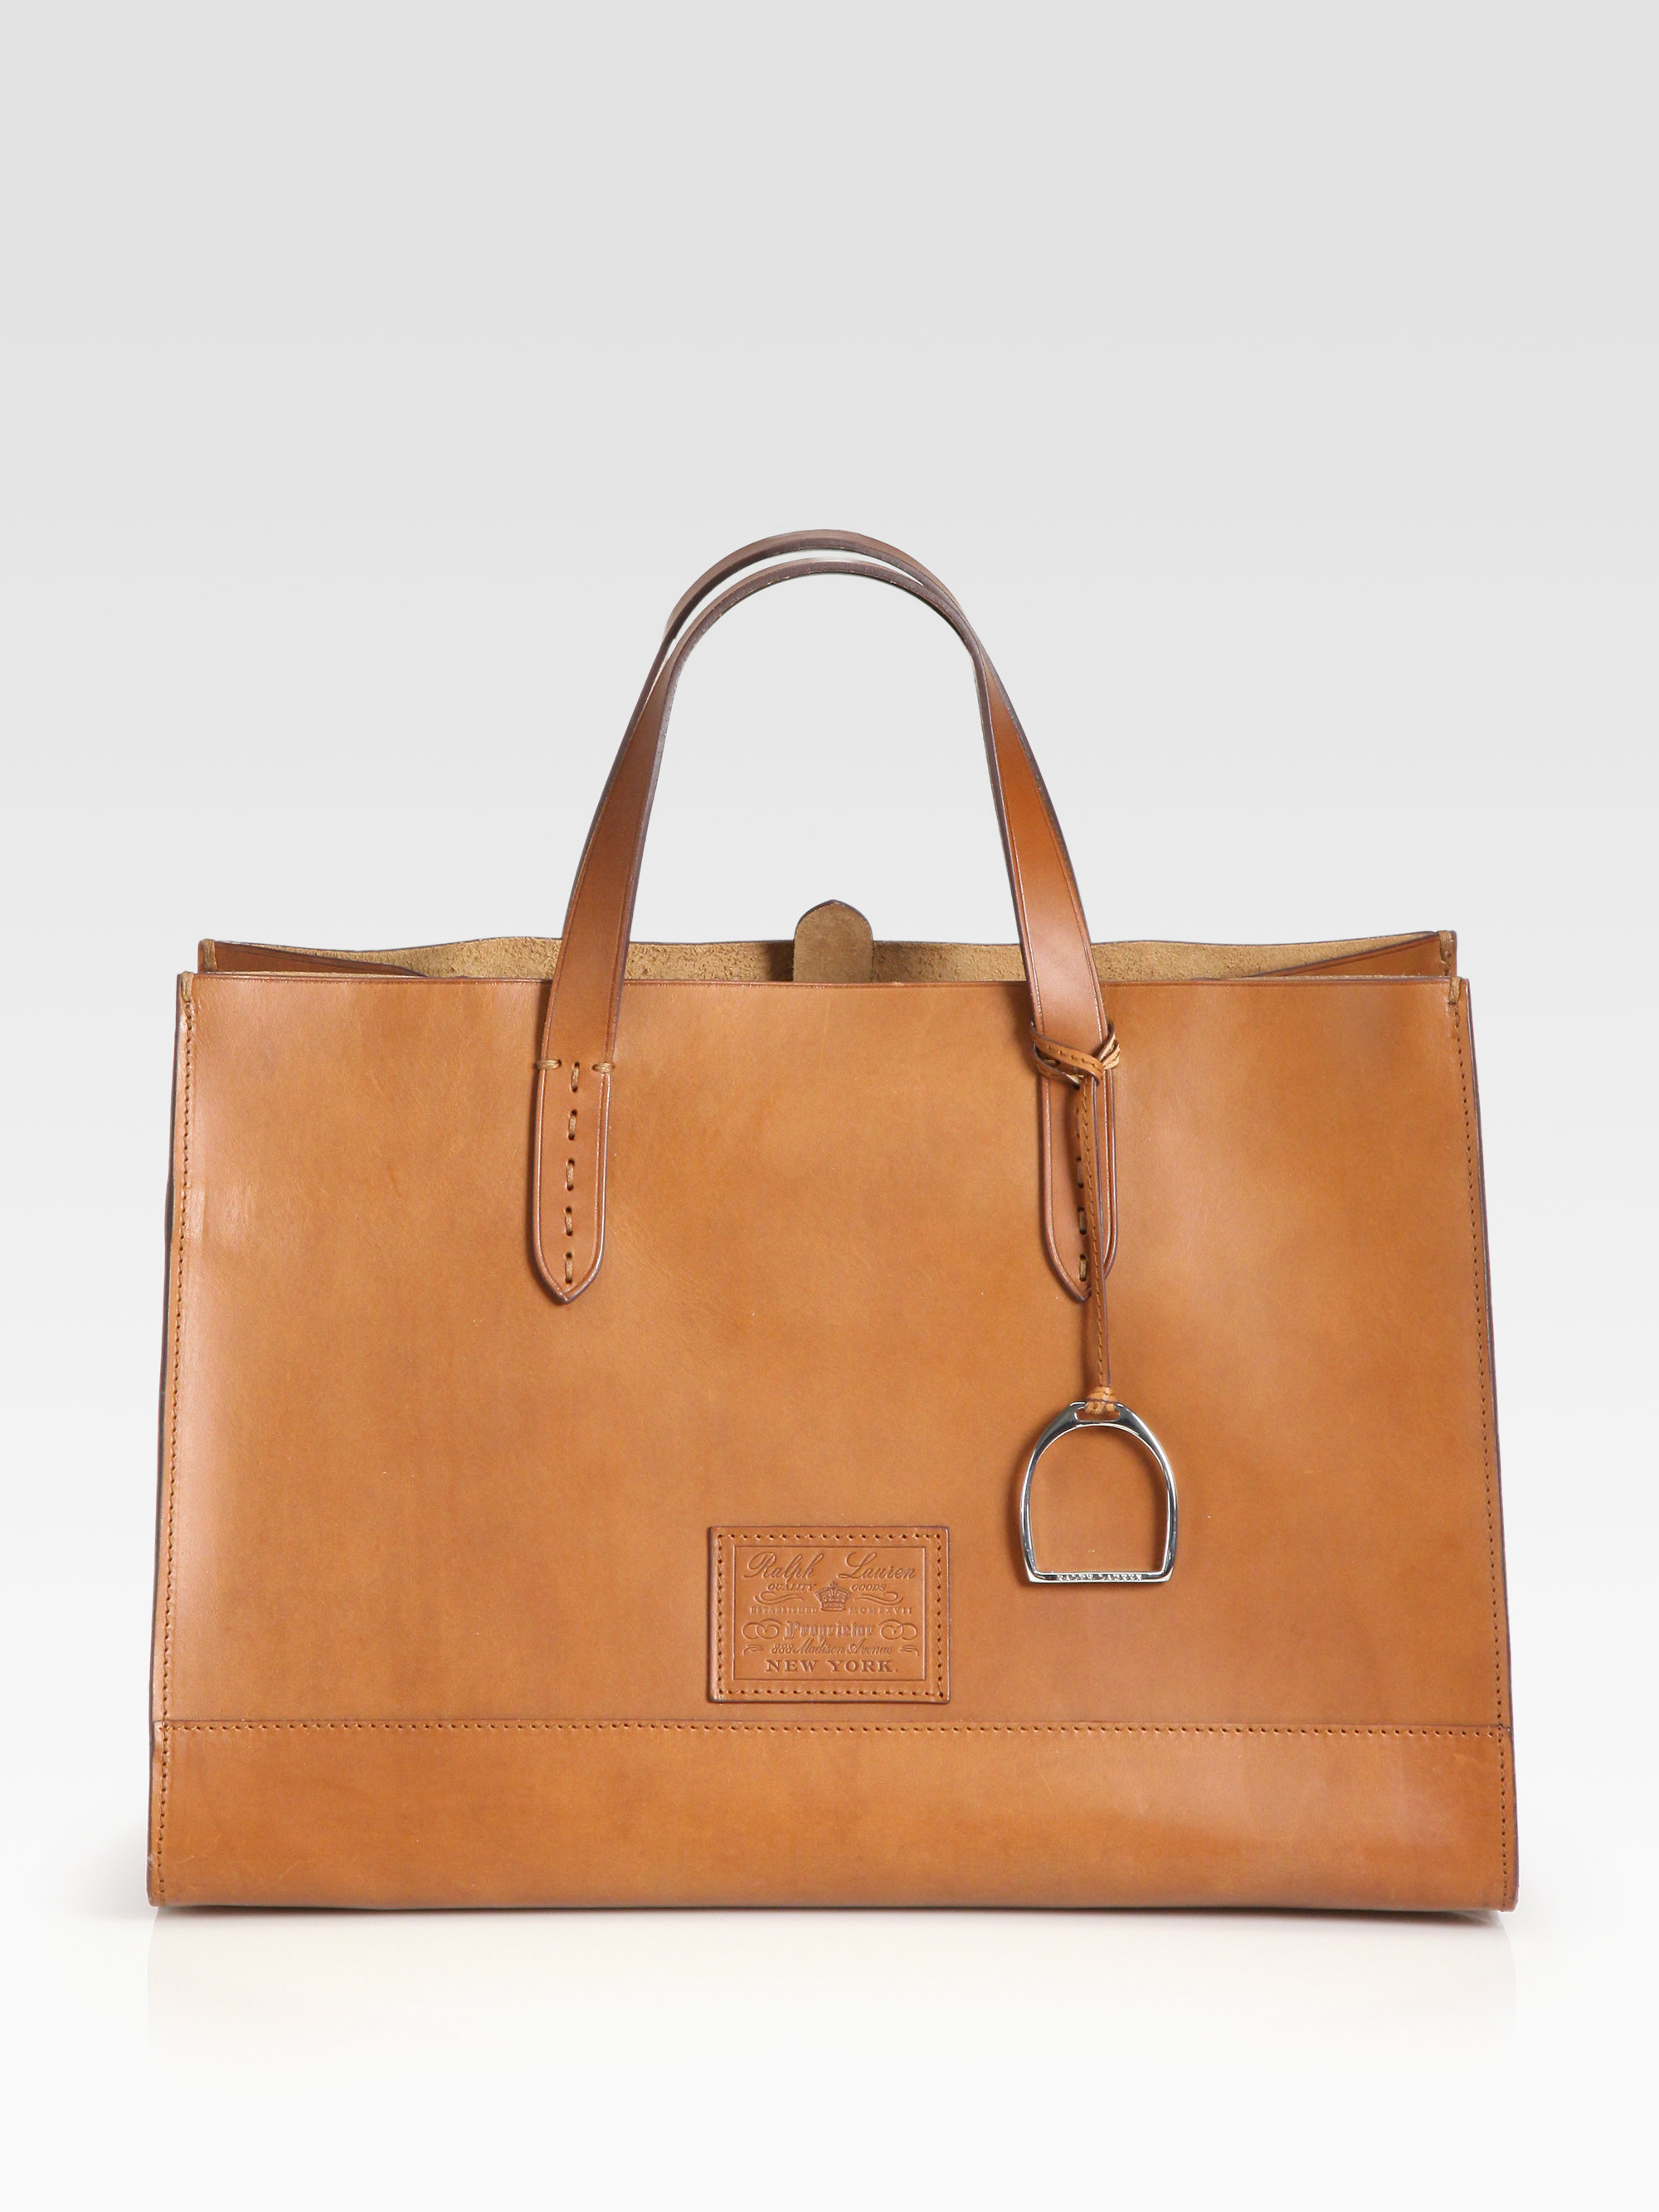 Lyst - Ralph Lauren Collection Rl Large Leather Saddle Tote in Brown